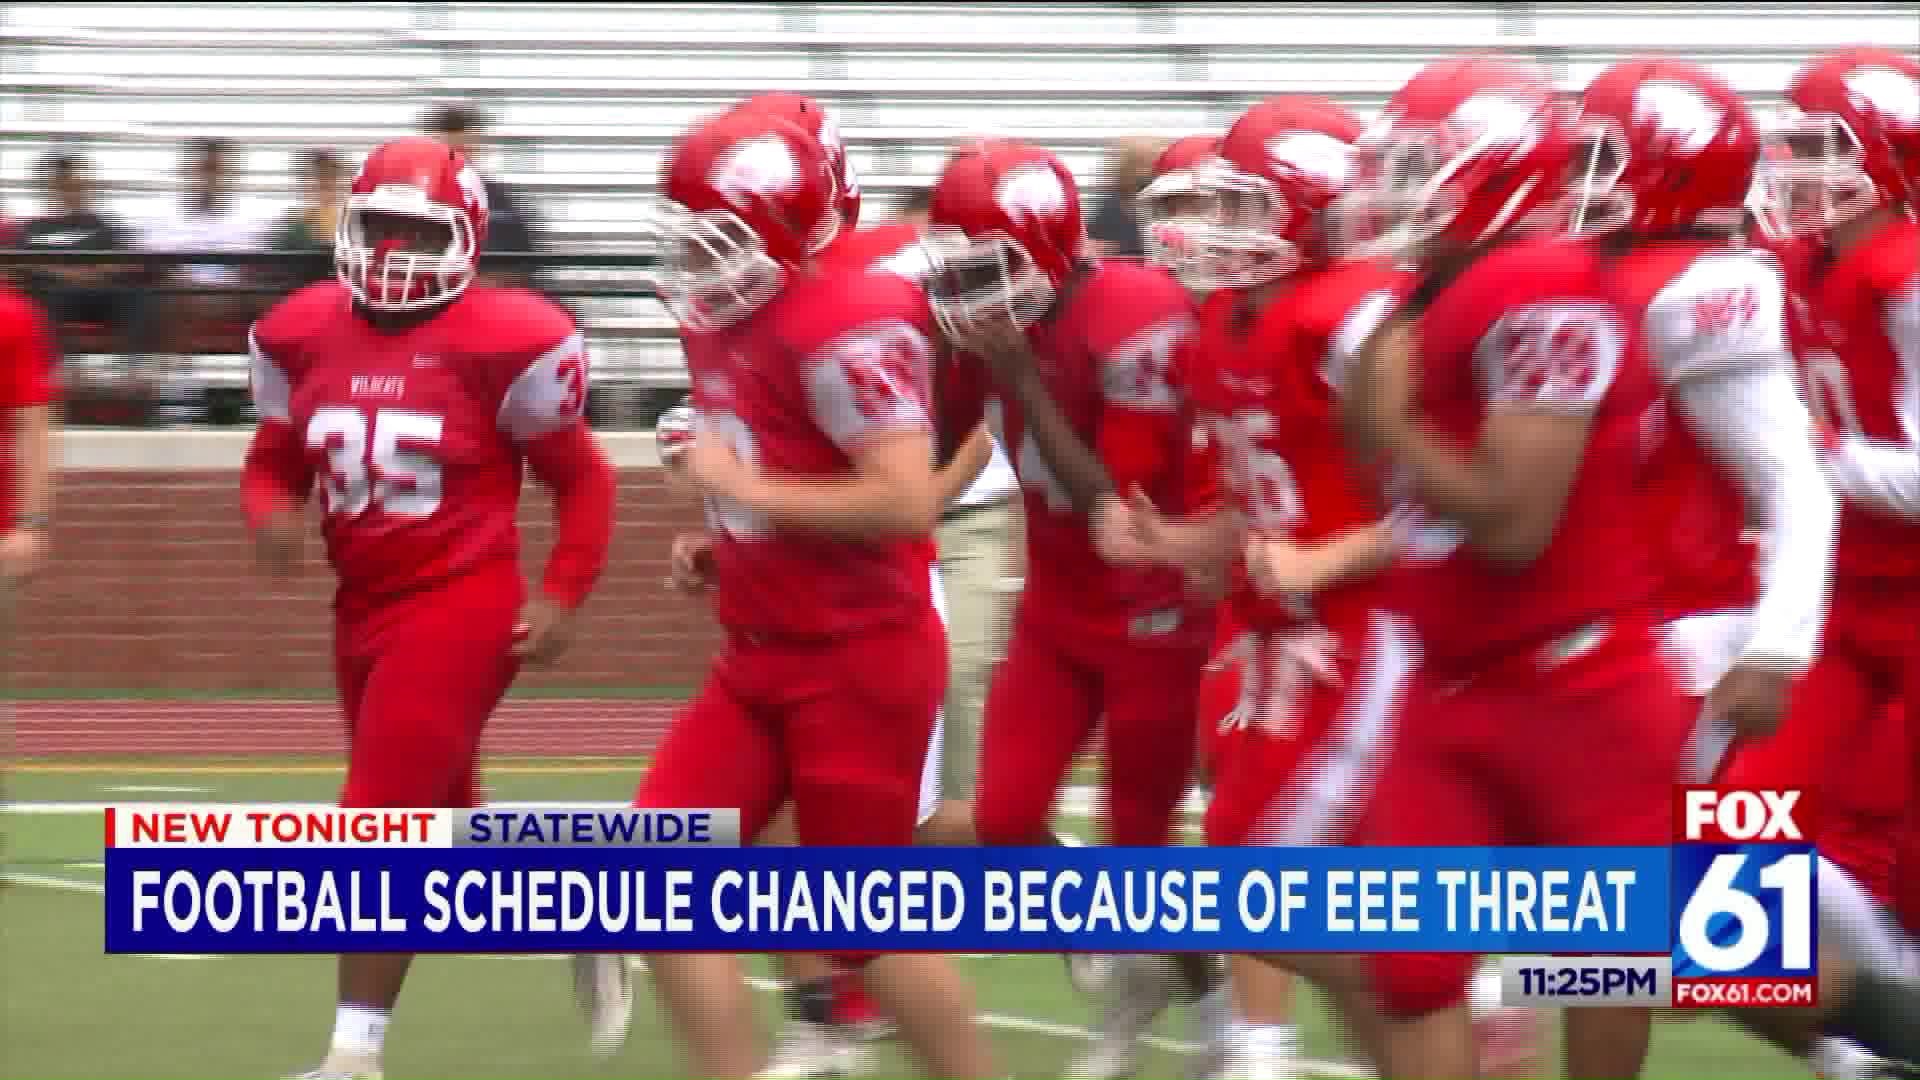 Football schedule changed due to EEE threat